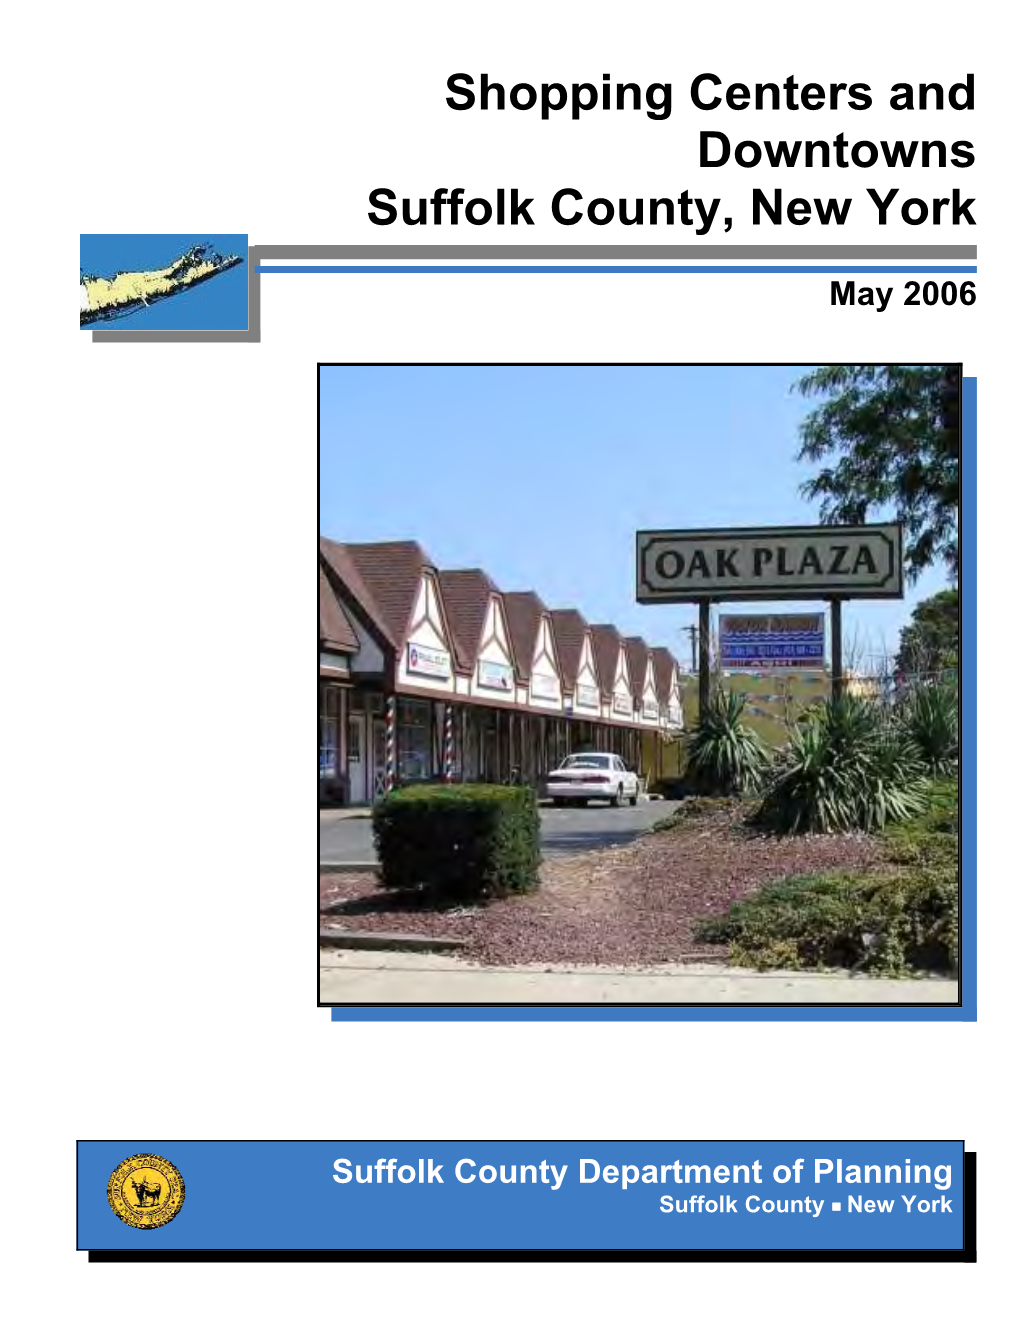 Shopping Centers and Downtowns – Suffolk County, New York